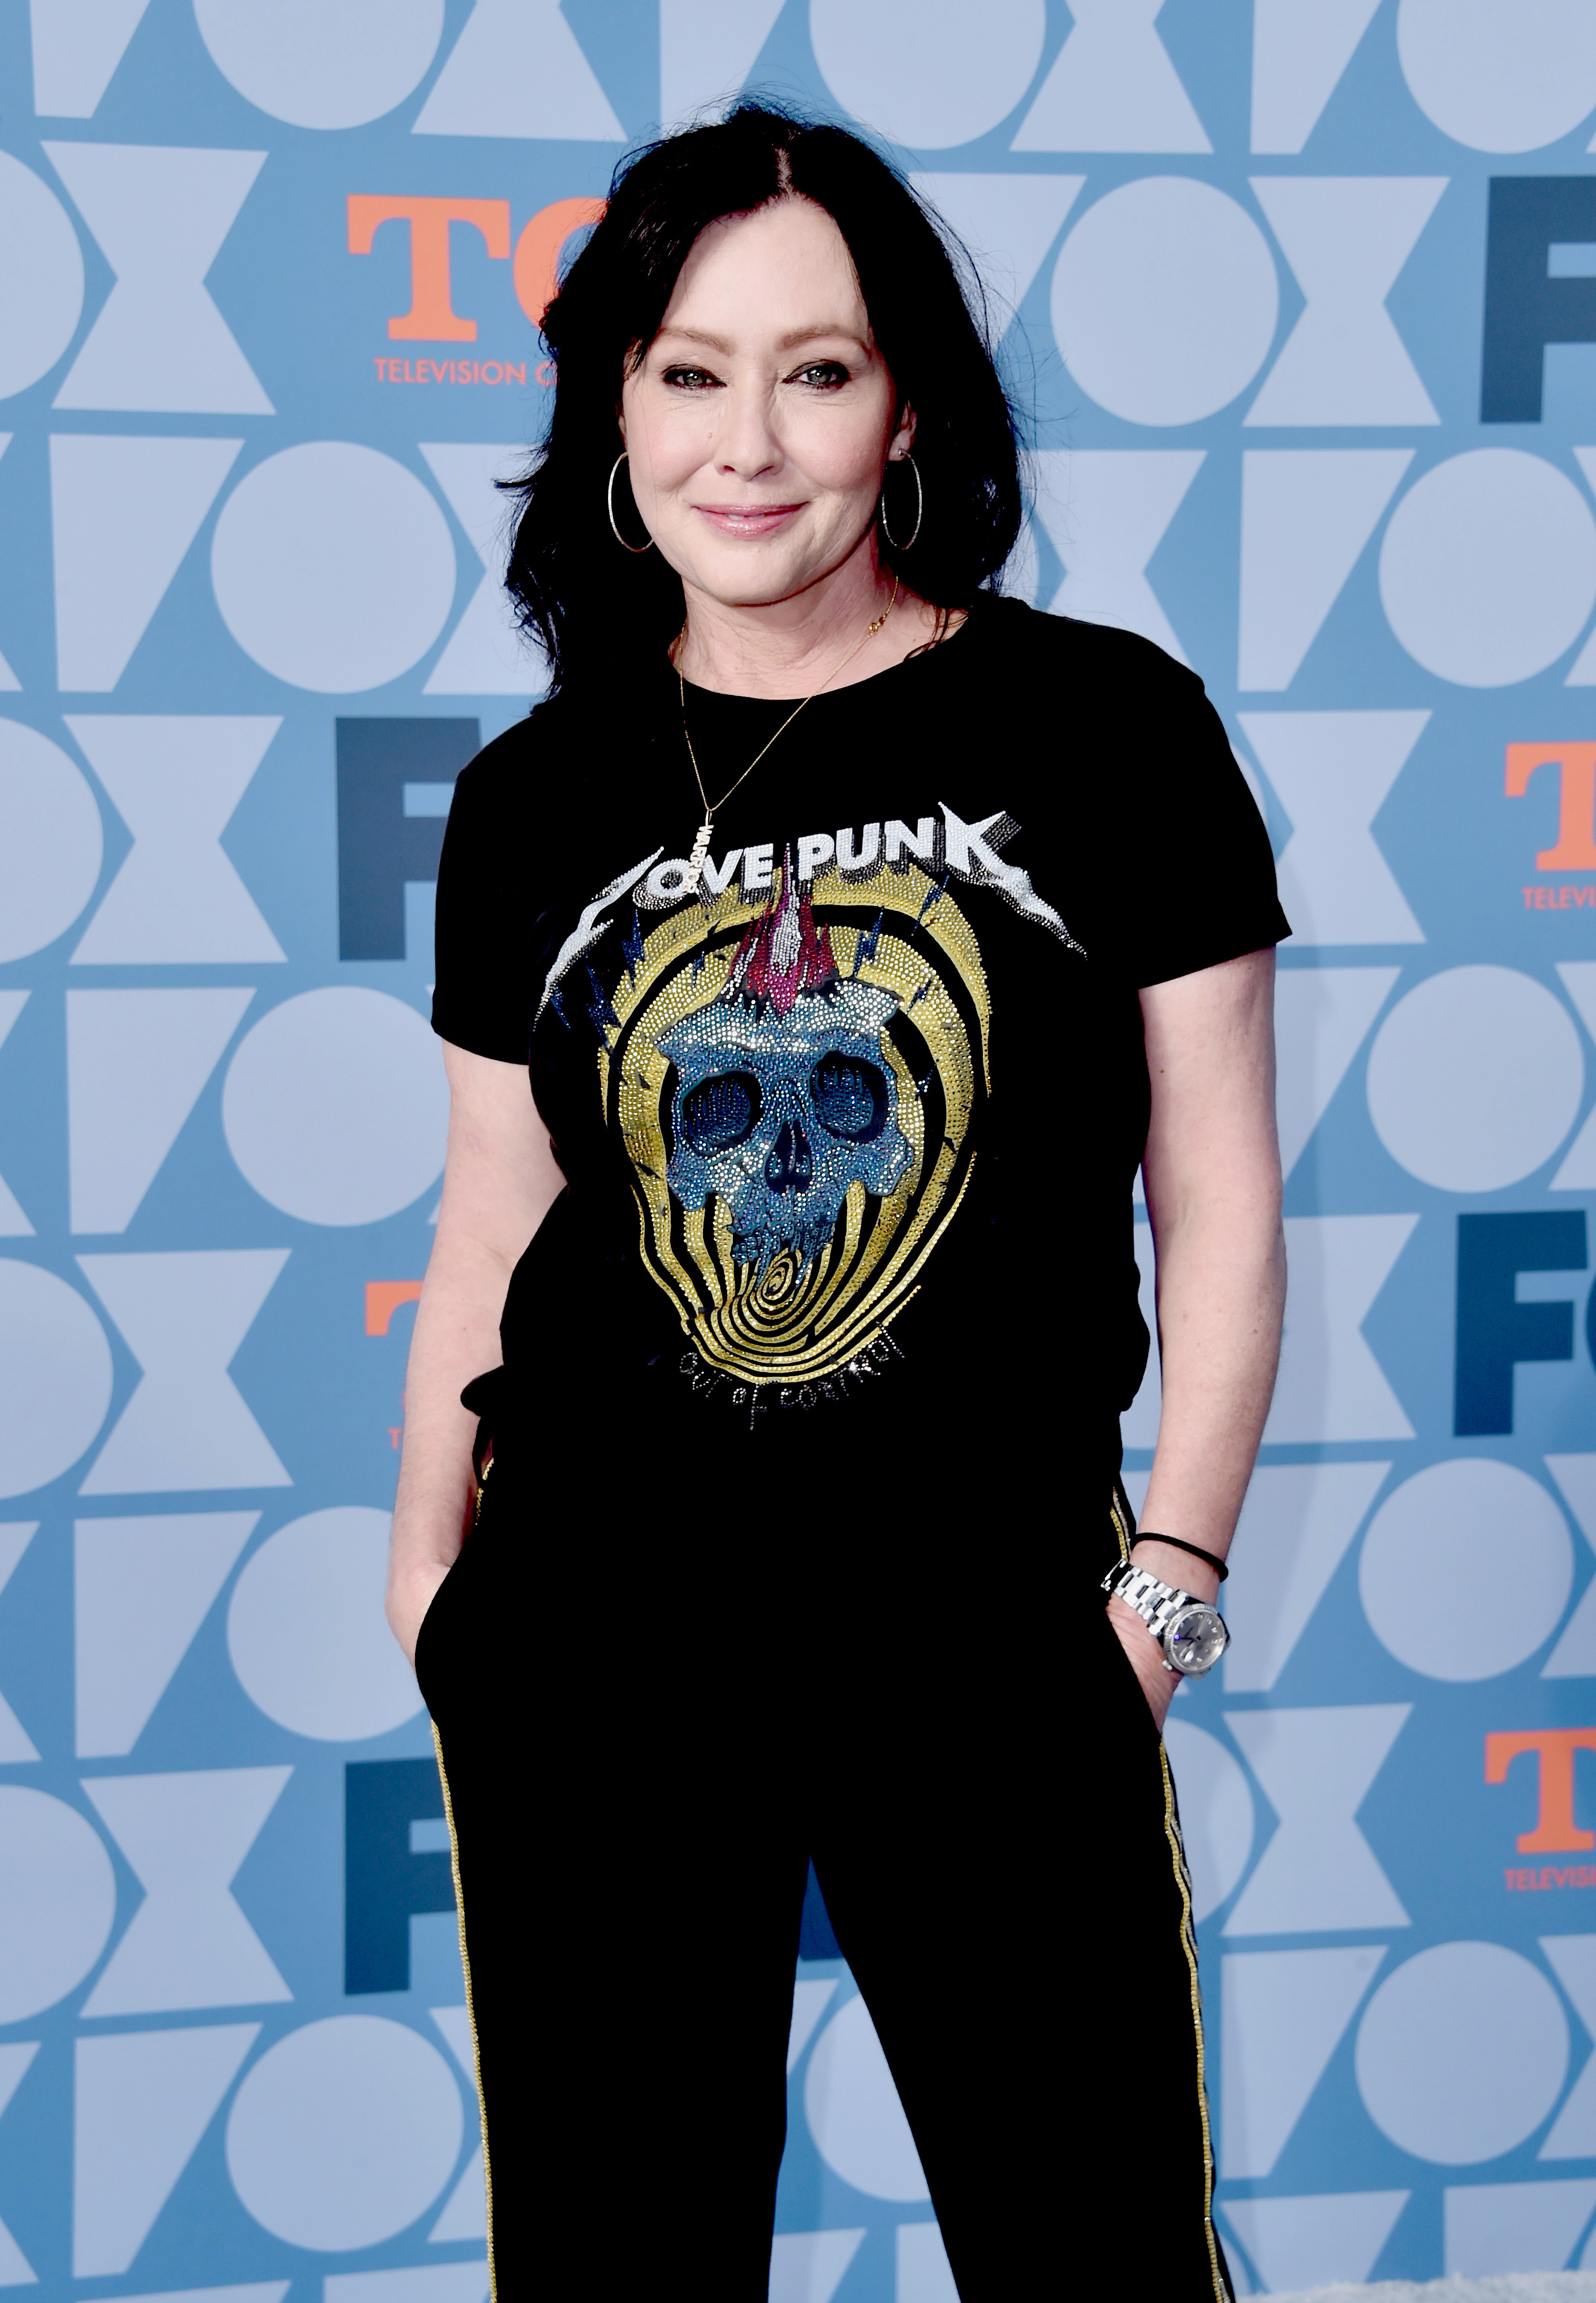 Shannen Doherty attends the FOX Summer TCA All-Star Party at Fox Studios in Los Angeles, California on August 07, 2019. | Source: Getty Images